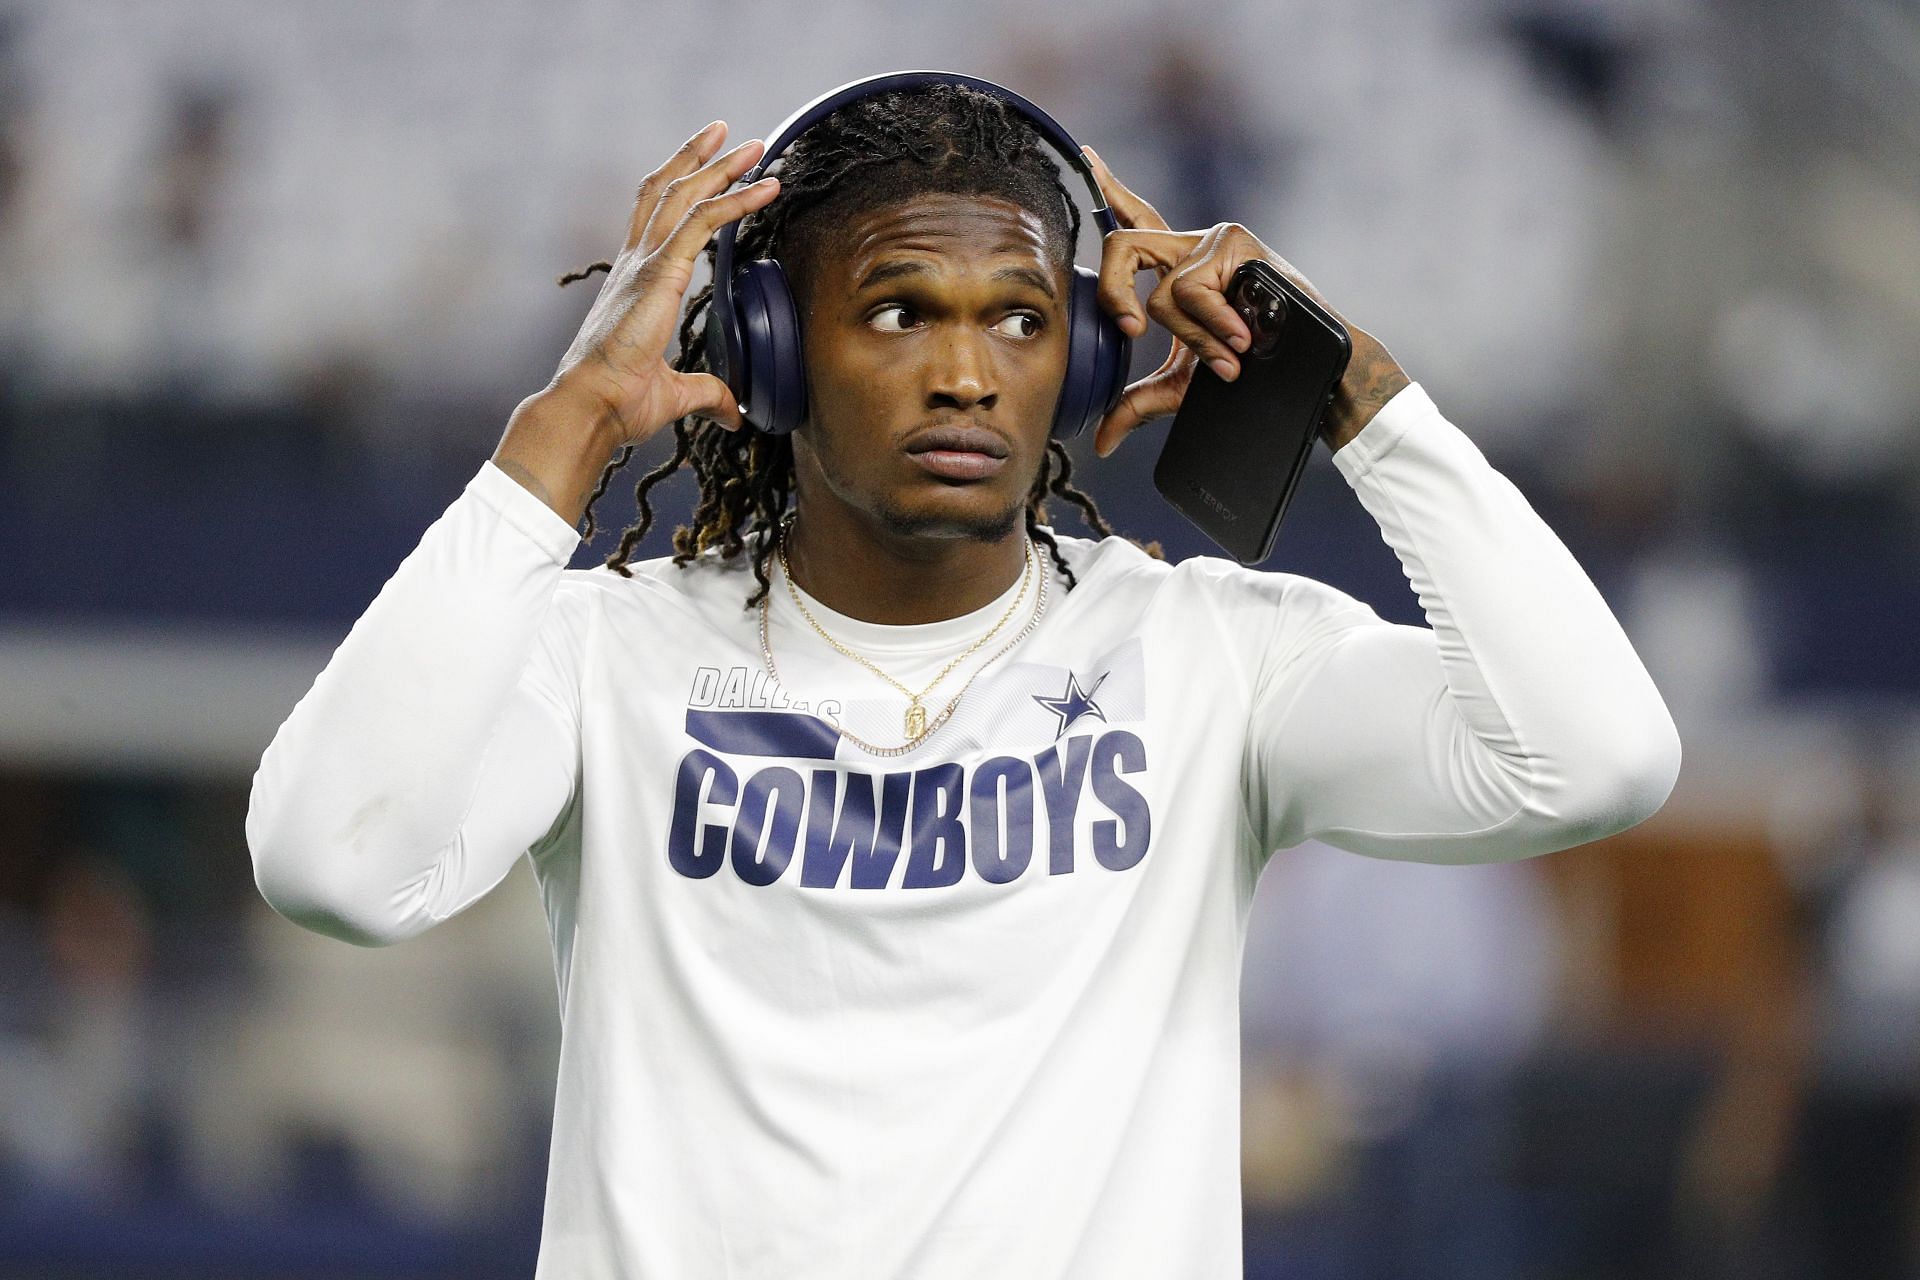 Dallas Cowboys wide receiver CeeDee Lamb warming up before an NFL game